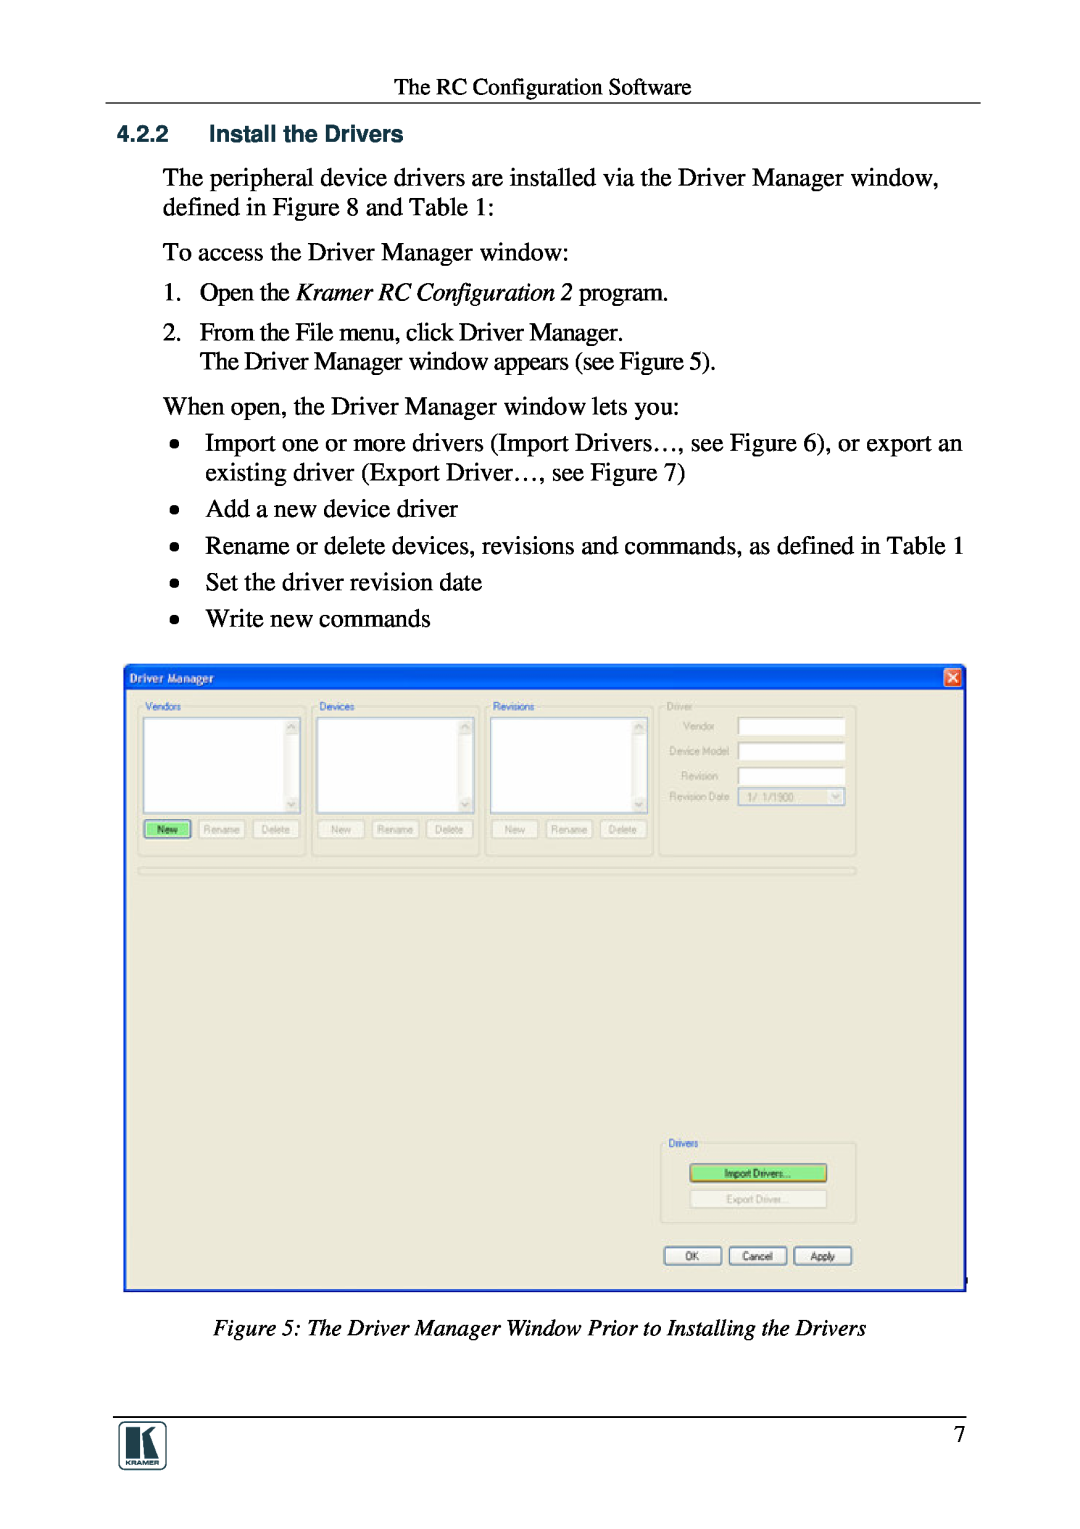 Kramer Electronics RC-SV manual Open the Kramer RC Configuration 2 program, To access the Driver Manager window 